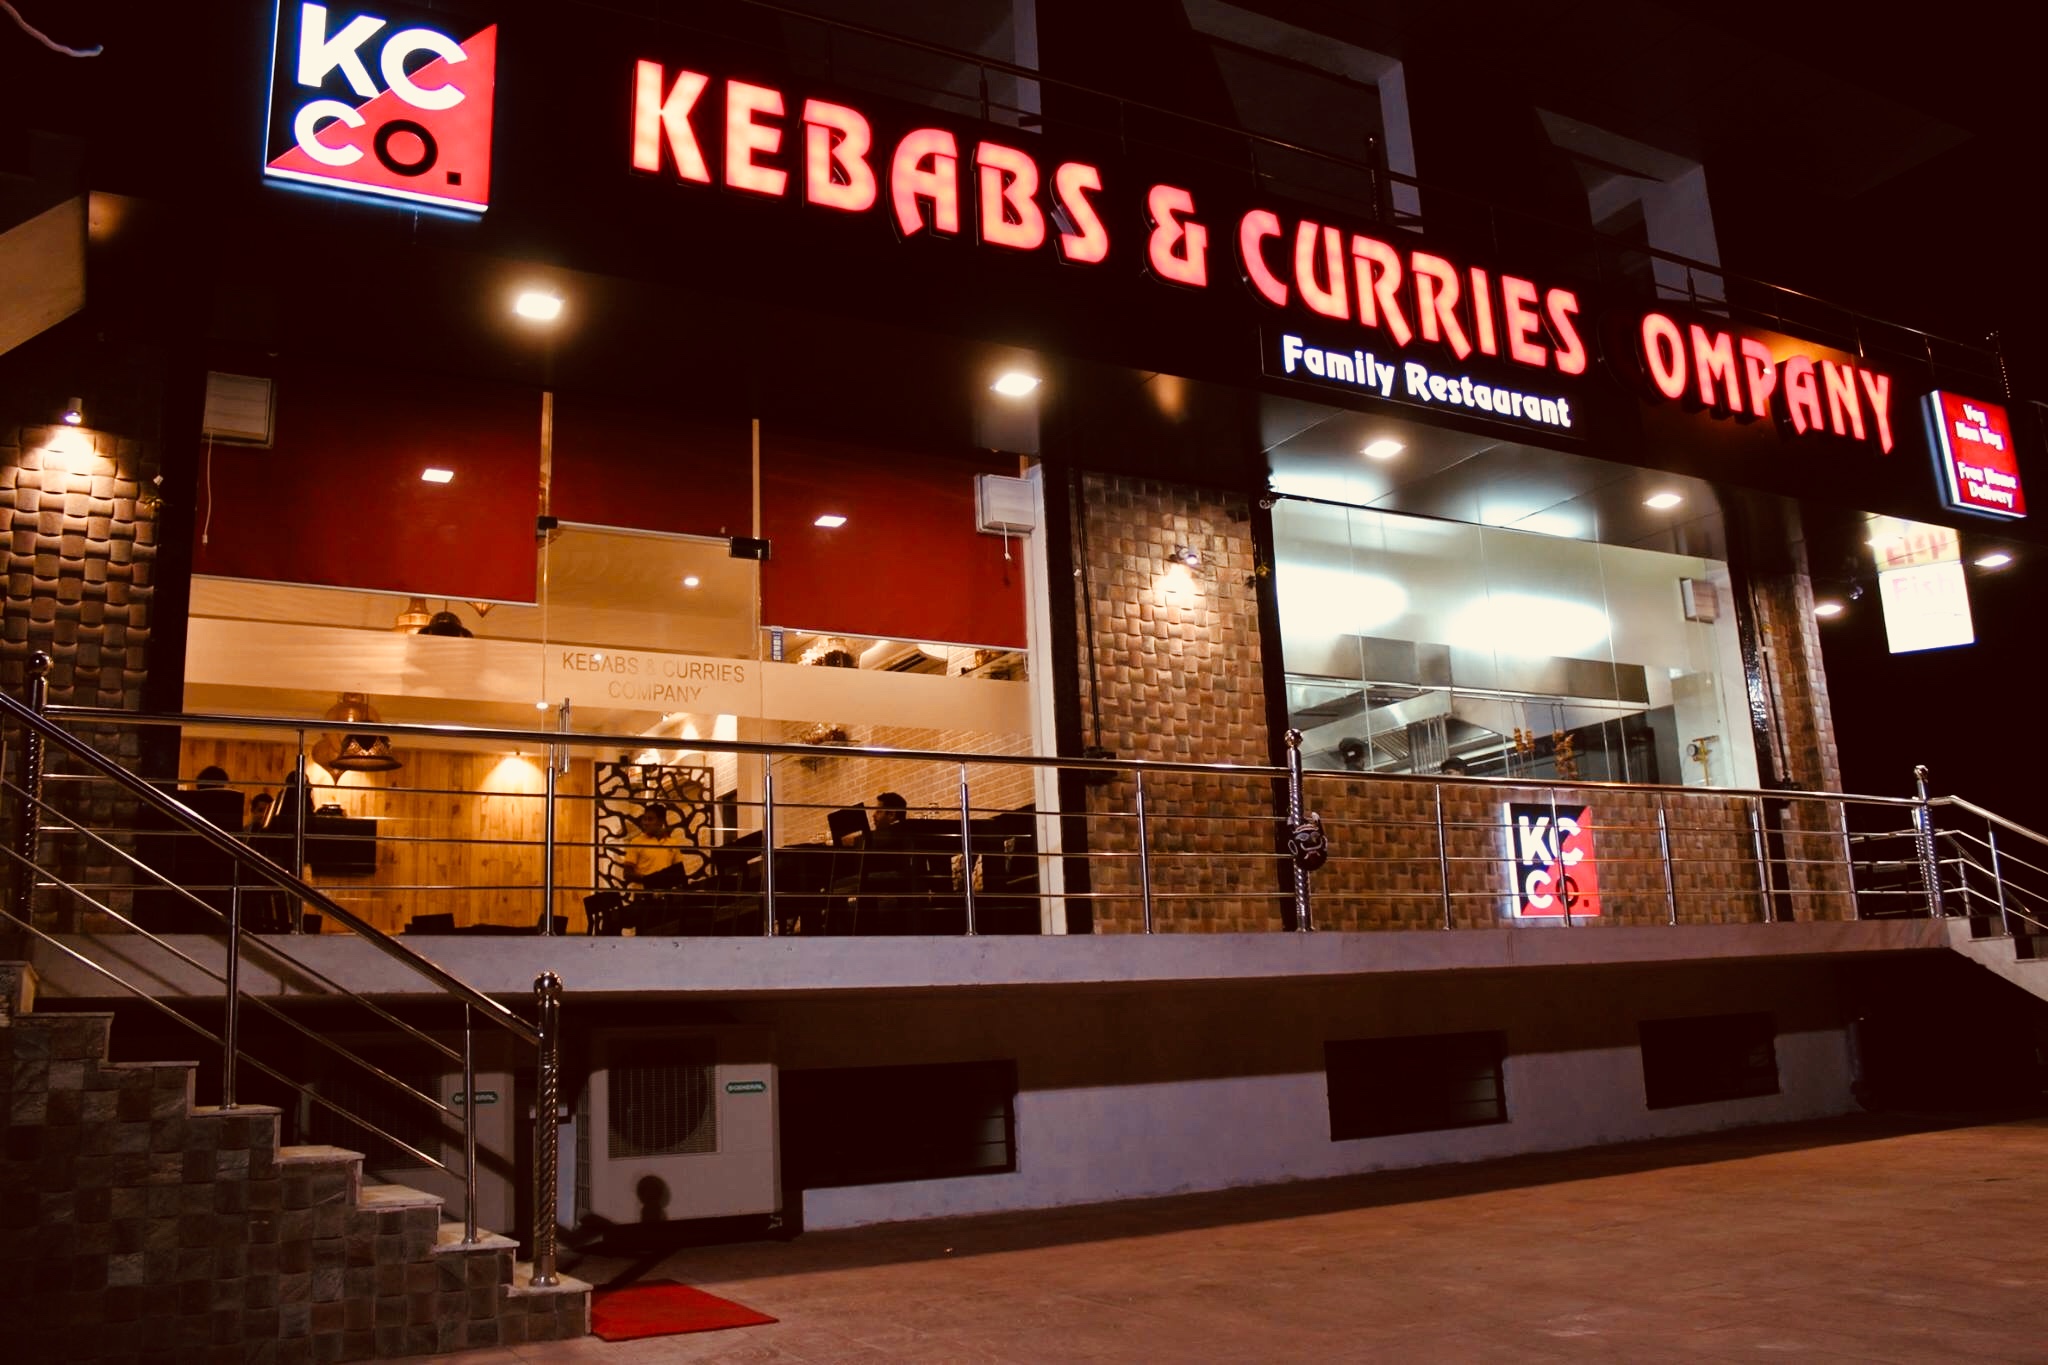 Kebabs and curries co is one of the famous non veg place in Jaipur. It provides very tasty food. Chicken is a must here. Here is the outside of kebabs and curries co.